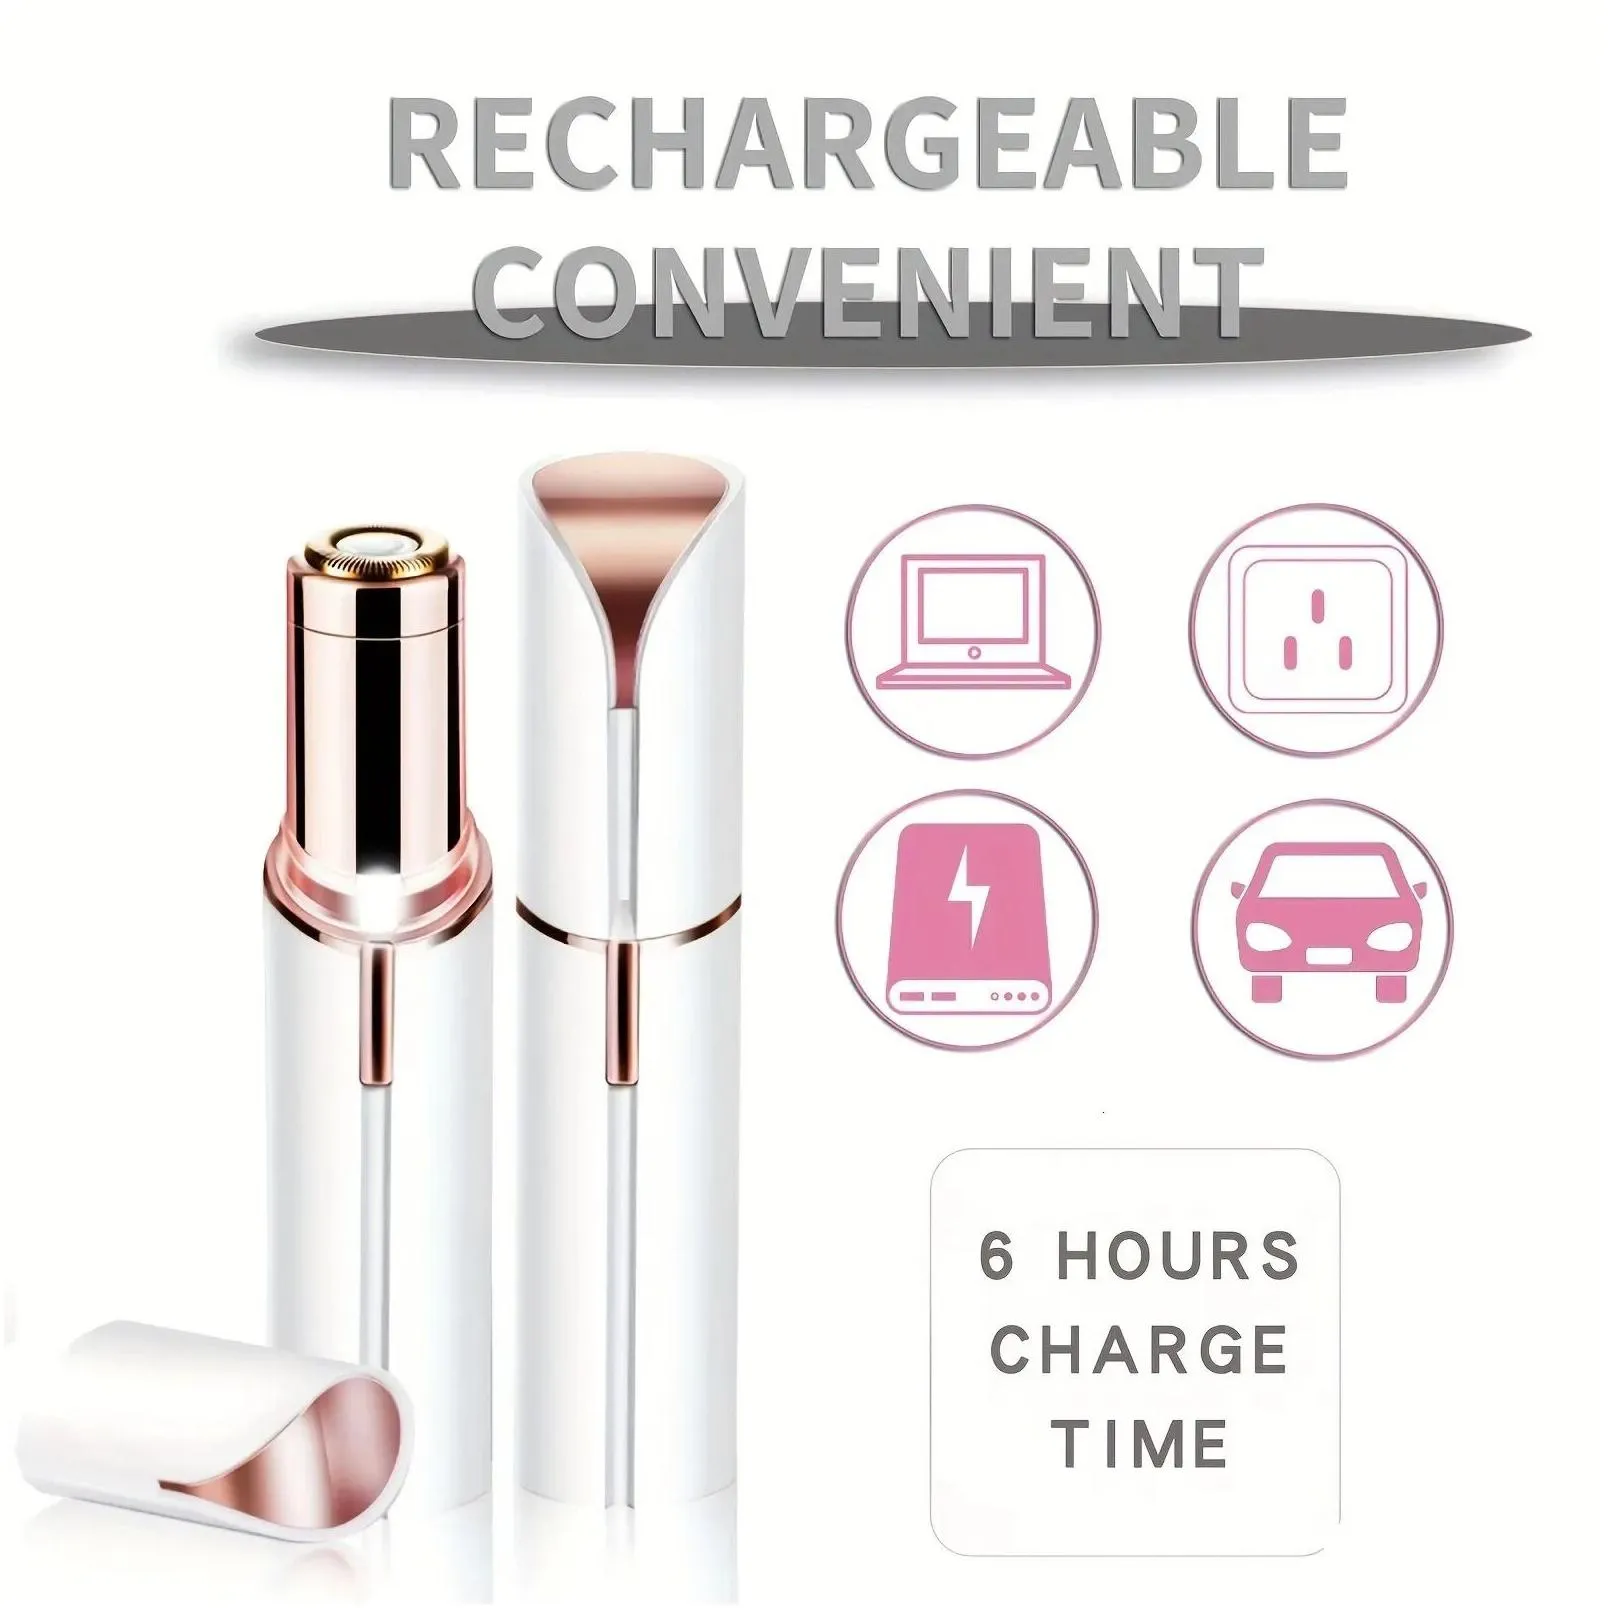 epilator portable lipstick shaped electric hair remover for women painless and effective removal home razor shaver tool 231128